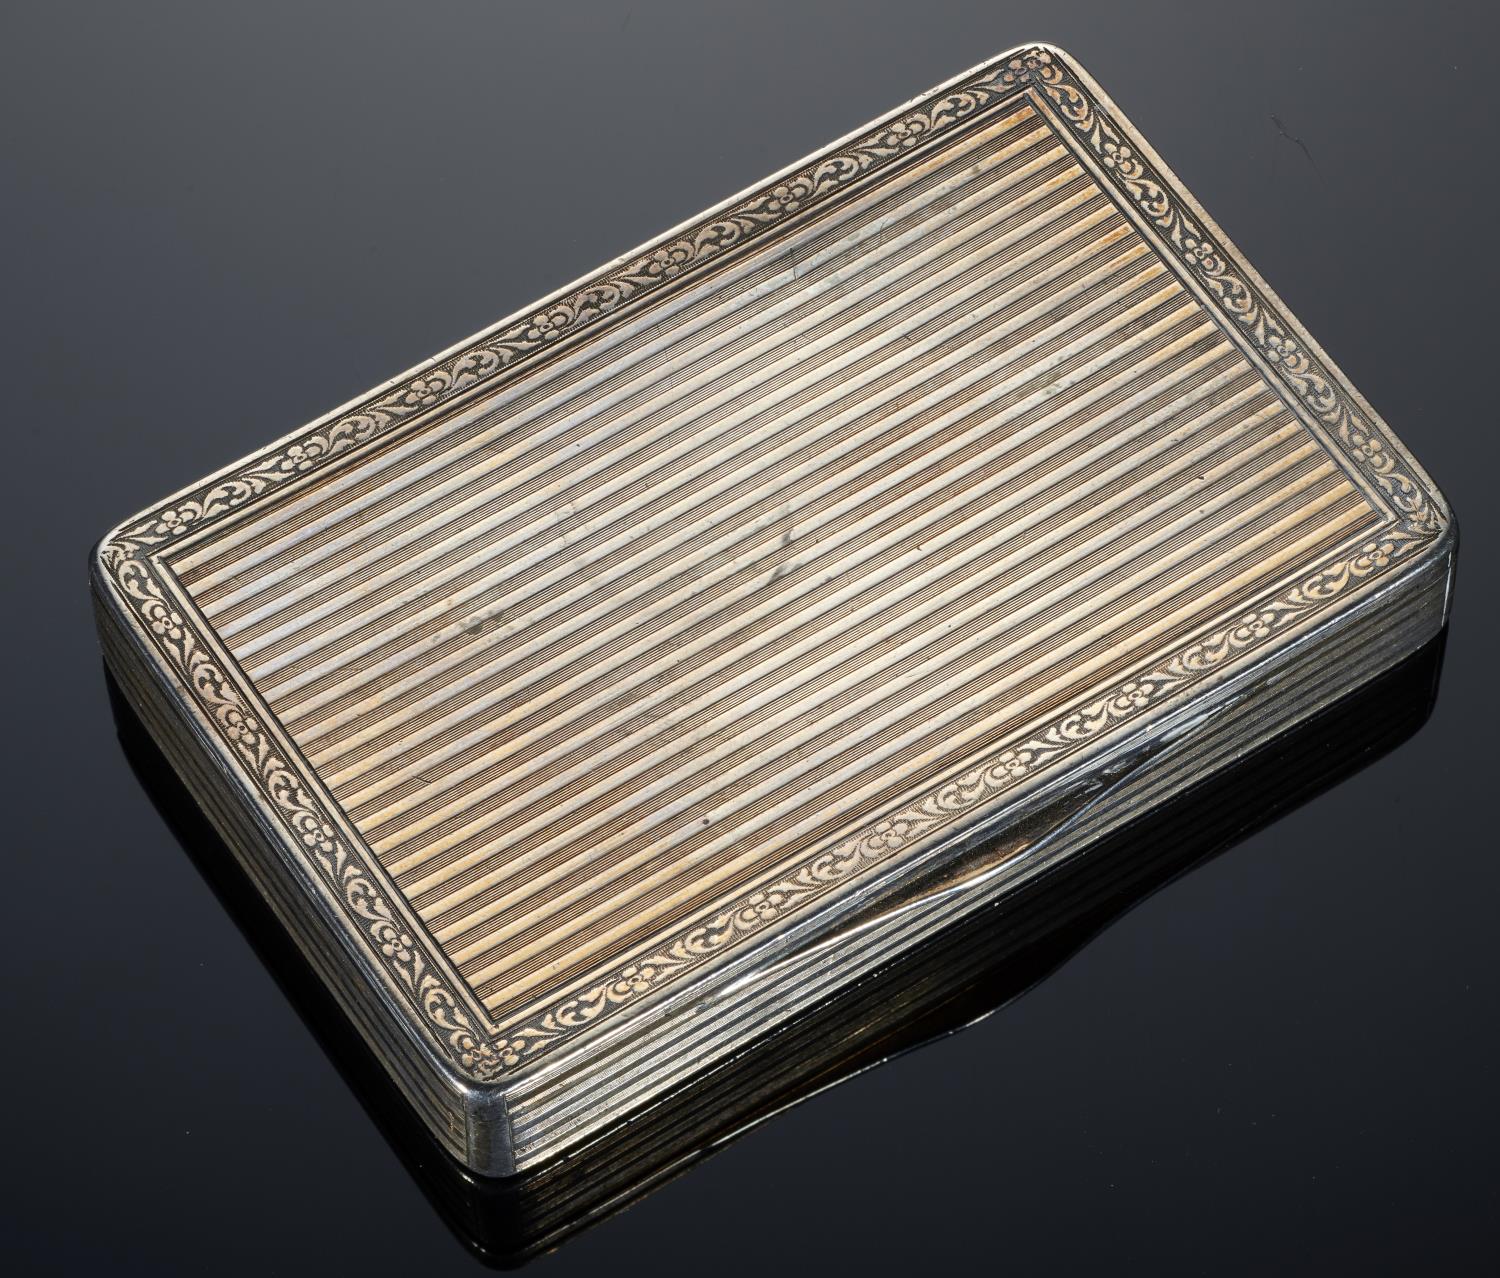 YACHTING.  A GERMAN SILVER CIGARETTE CASE, DATED 1927  with integral hinge and engine turned, the